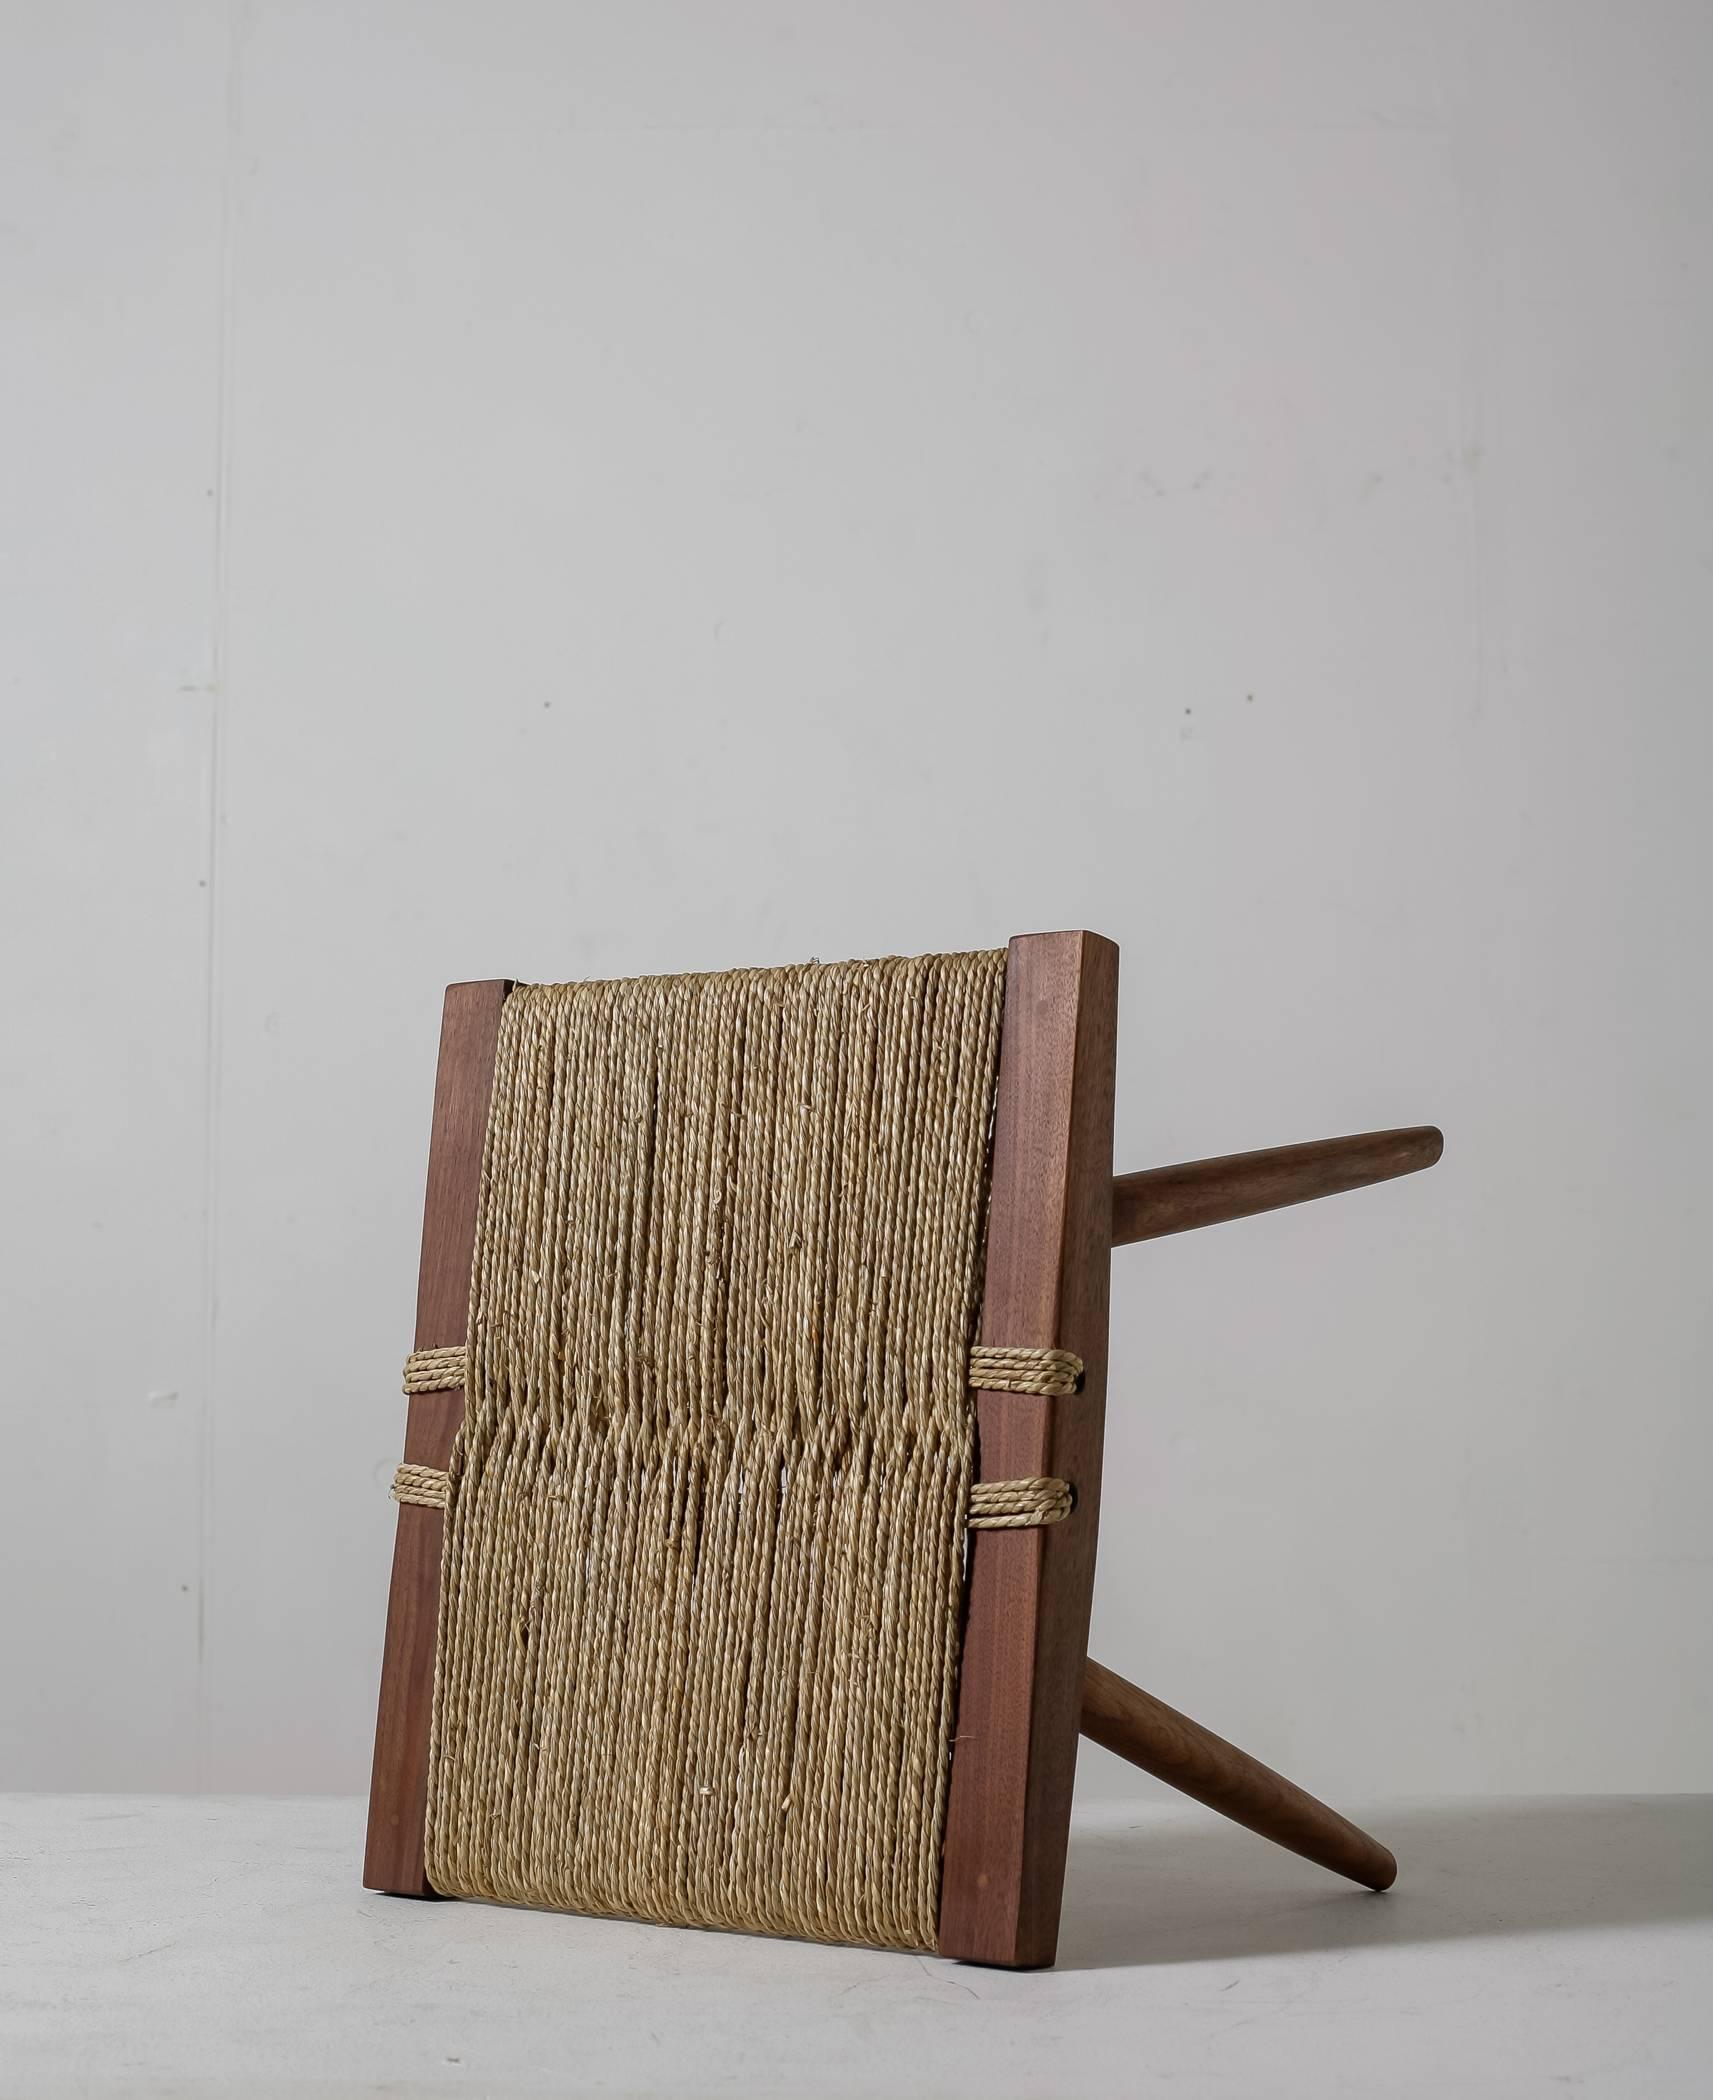 Woven George Nakashima Walnut with Grass Rope Stool, USA, 1950s For Sale